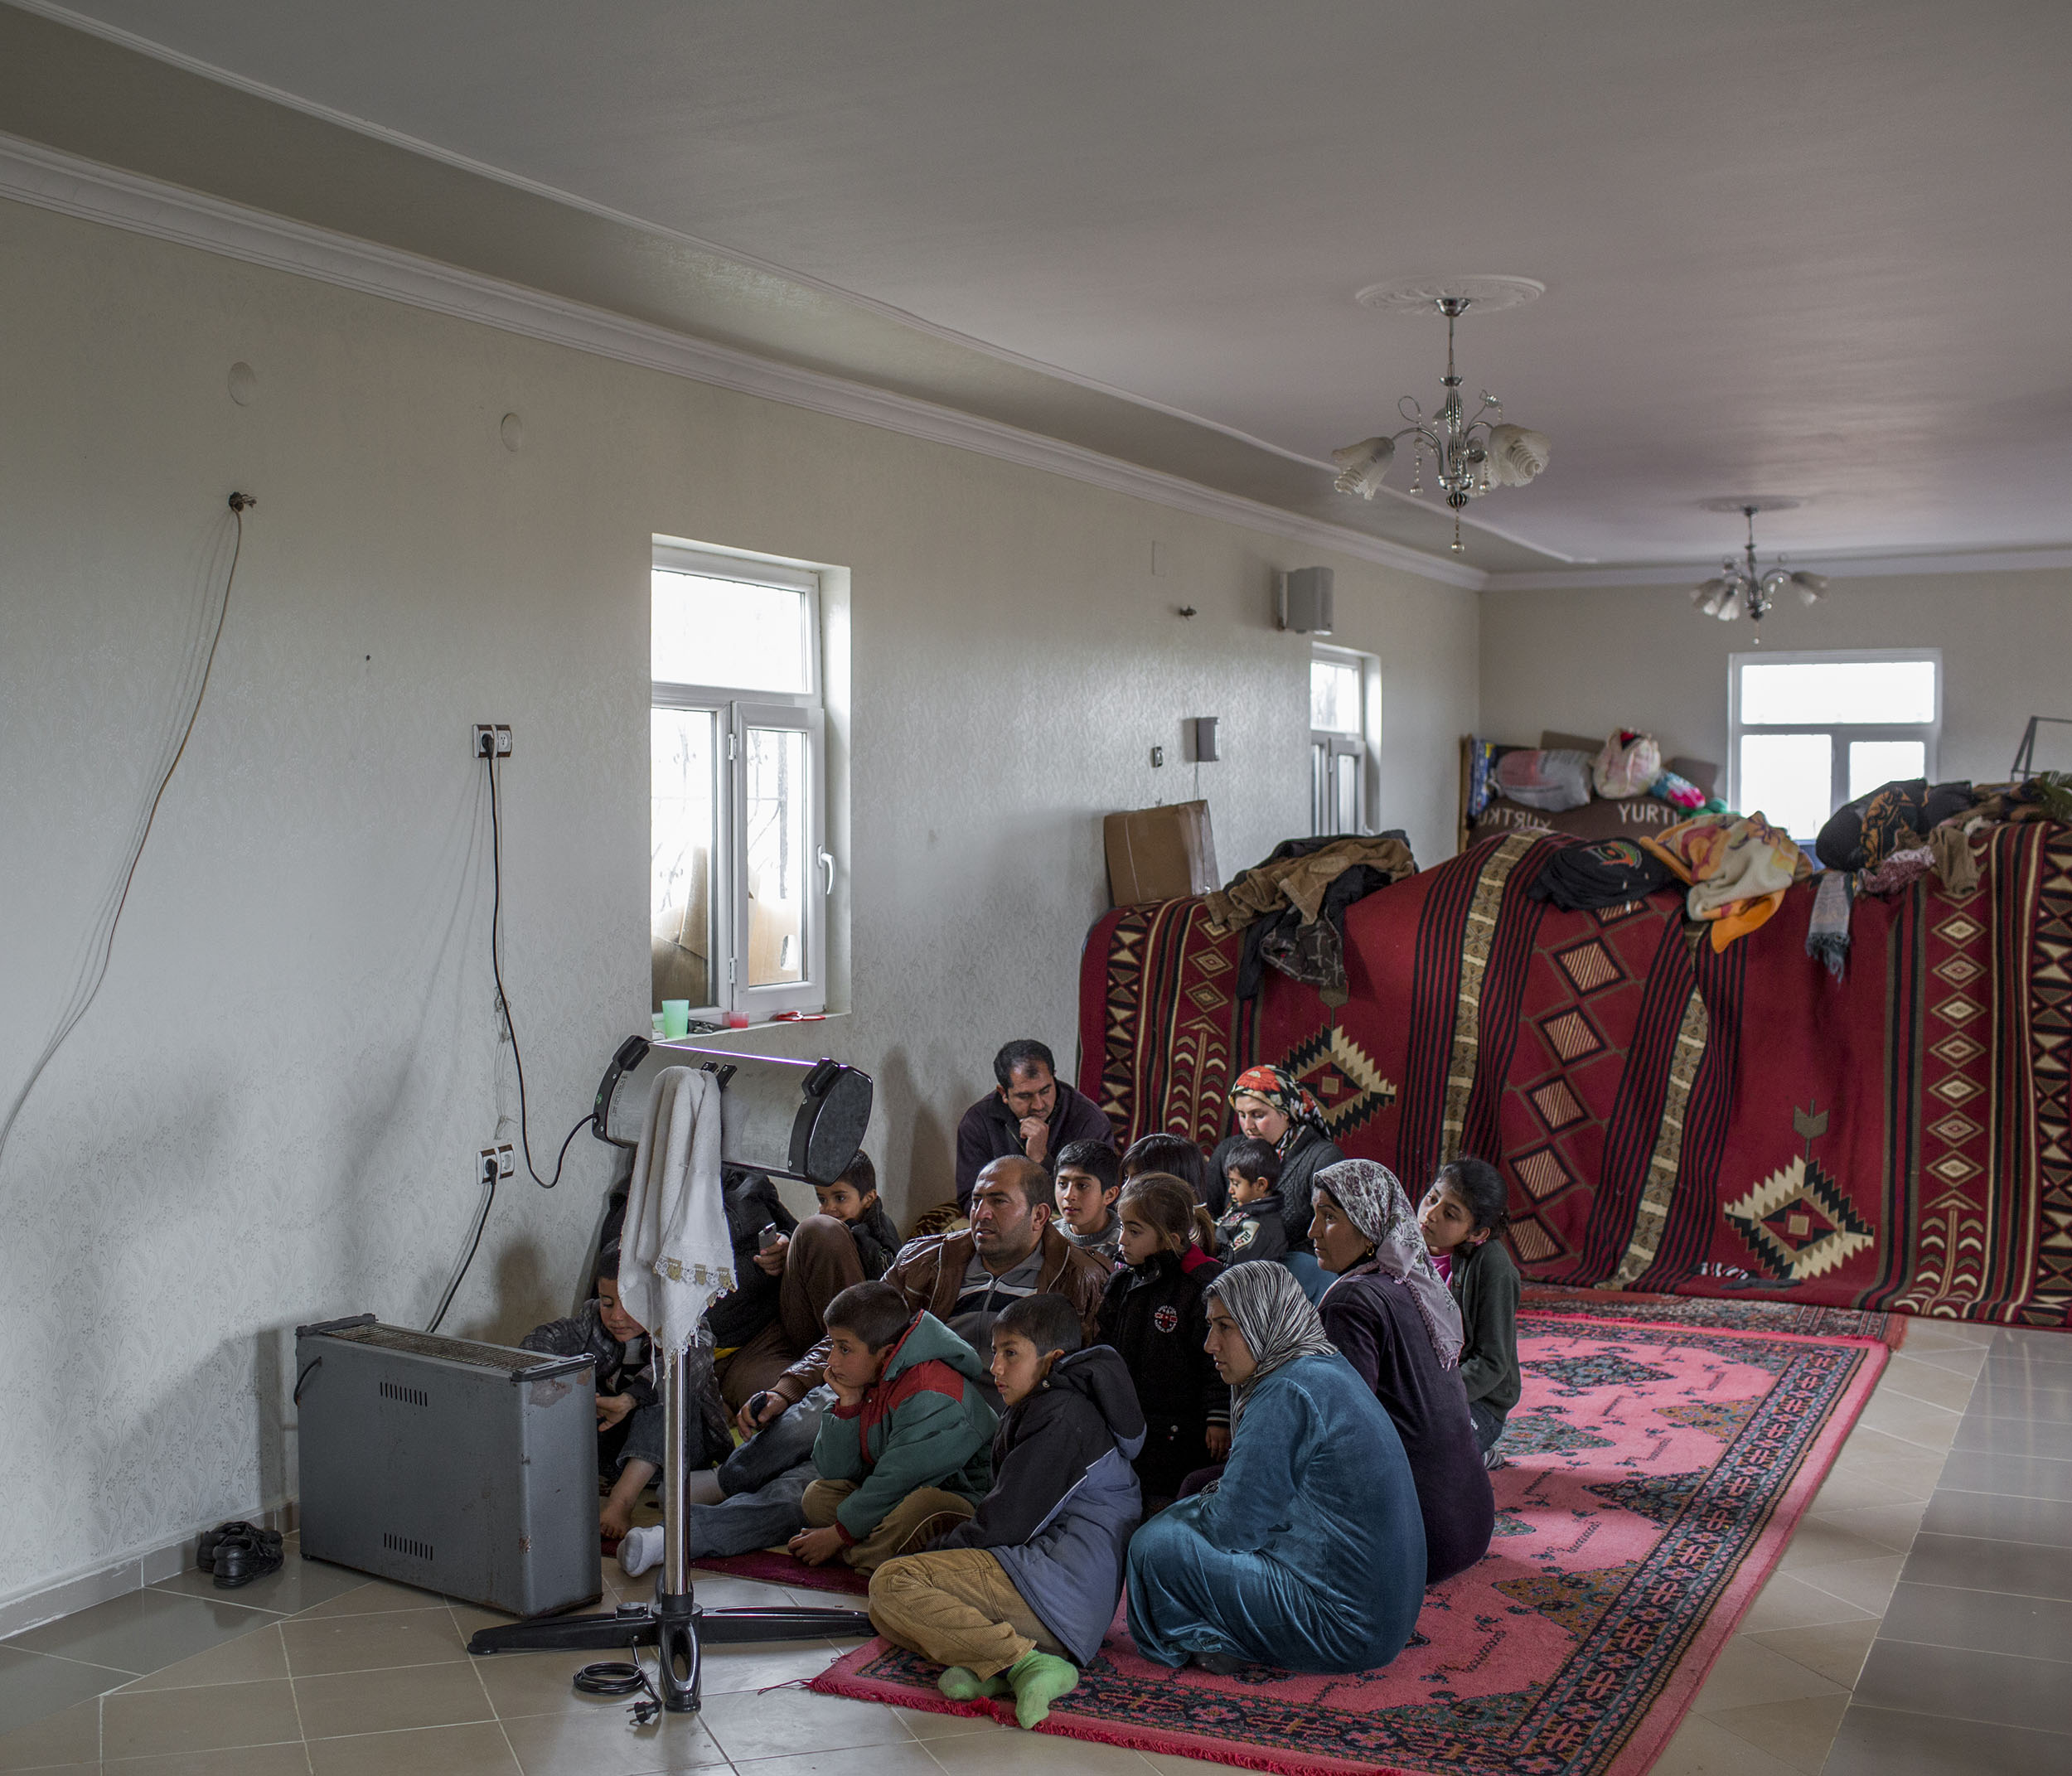  A family of Syrian refugees from Kobane huddle around the heater while watching TV in the unfinished building where they have found refuge in Turkey. 